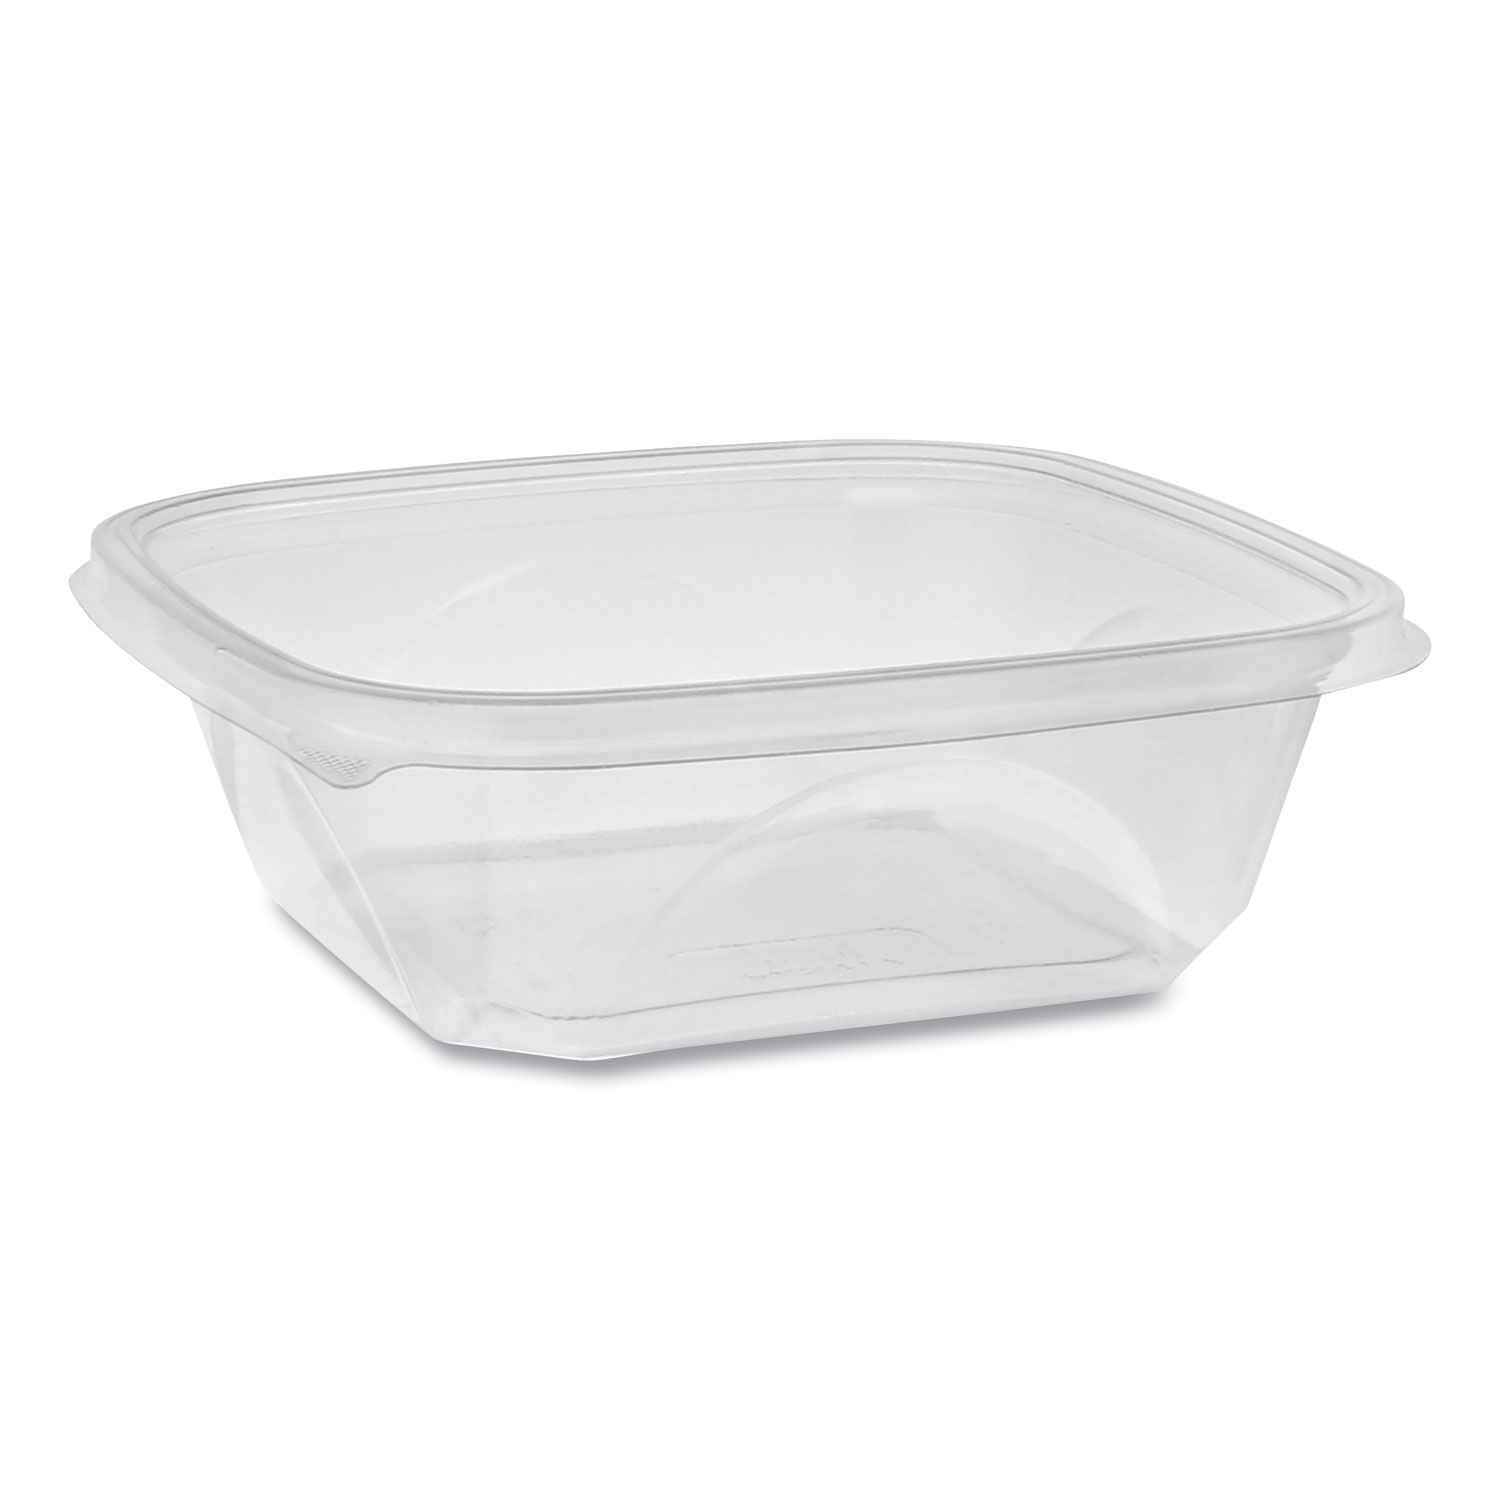  Pactiv SAC0732 EarthChoice Recycled PET Square Base Salad Containers, 7 x 7 x 2, 32 oz, Clear, 300/Carton (PCTSAC0732) 